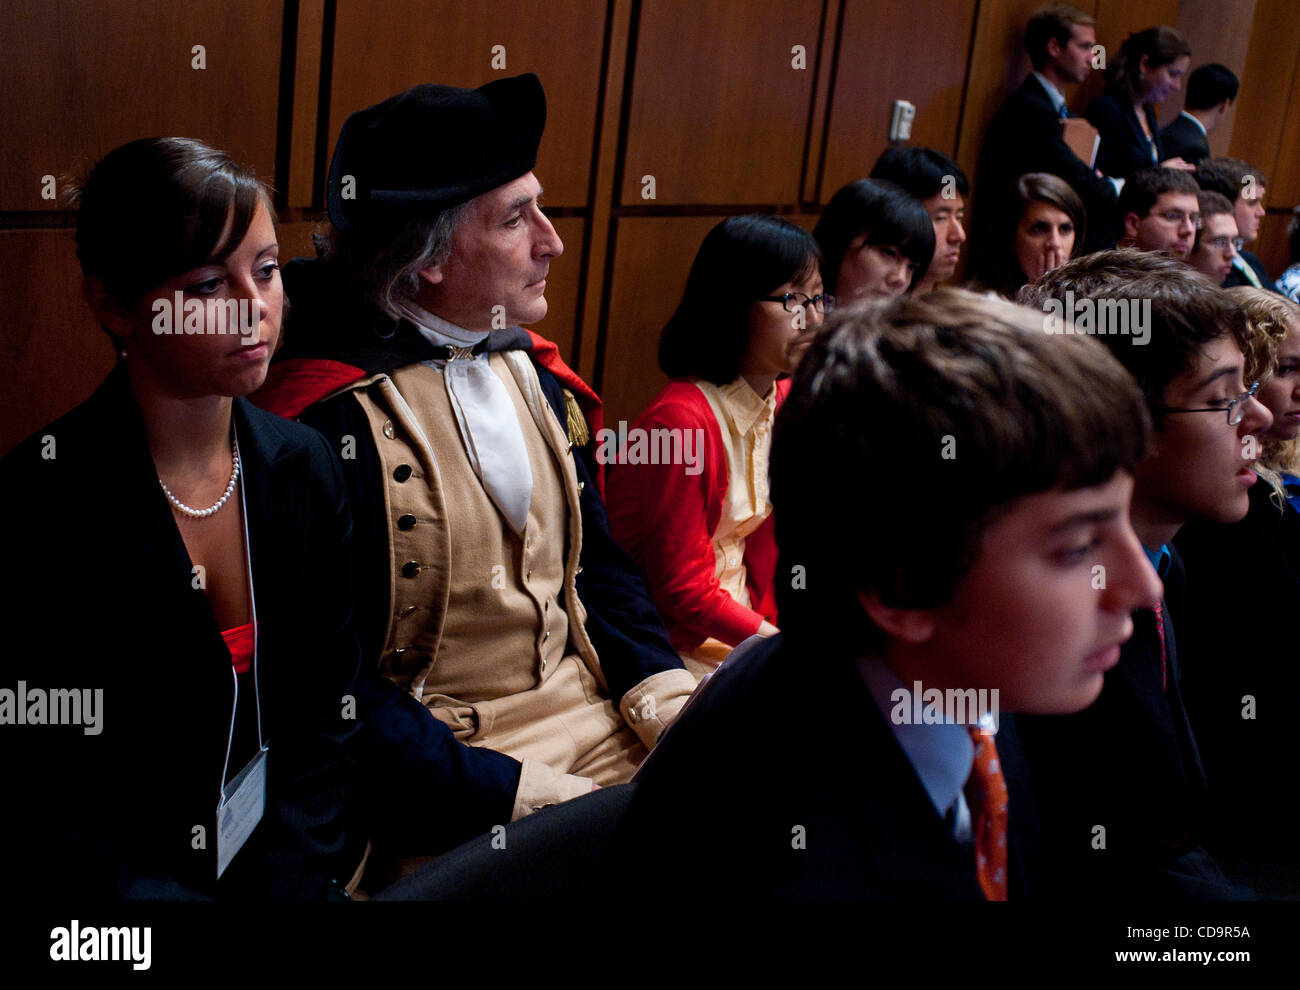 Jul 20, 2010 - Washington, District of Columbia, U.S., - Dressed as George Washington, JAMES RENWICK MANSHIP, SR, watches the proceedings of the Senate Judiciary Committee meeting on Tuesday. The committee voted, 13-6, in favor of Solicitor General KaganÃ•s confirmation to the Supreme Court. The vot Stock Photo